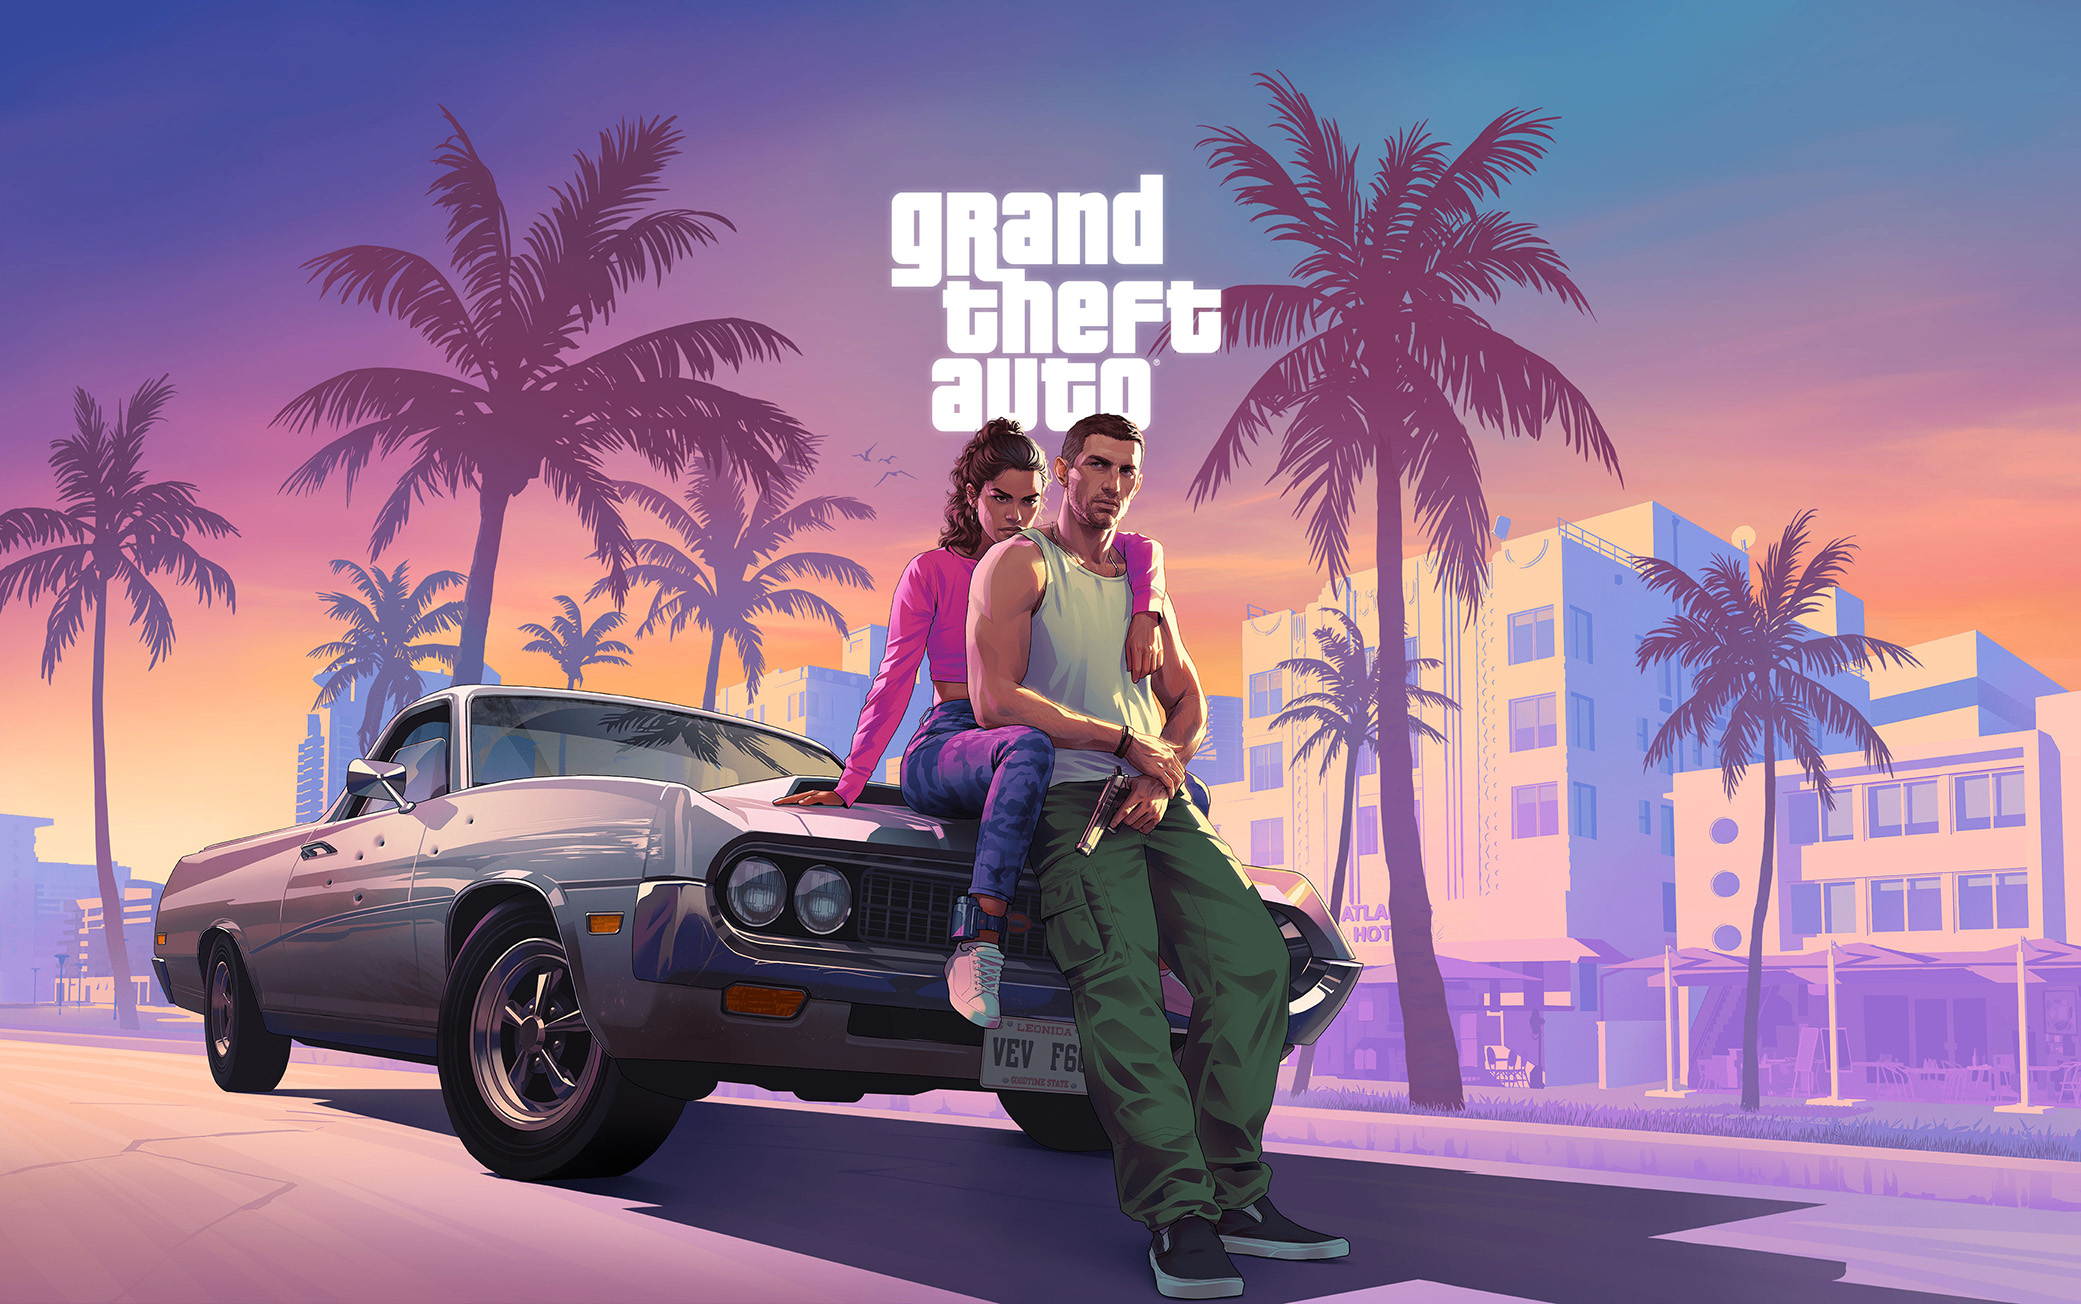 What Are the Aspects that Grand Theft Auto VI Online is Bringing In From GTA V Online?